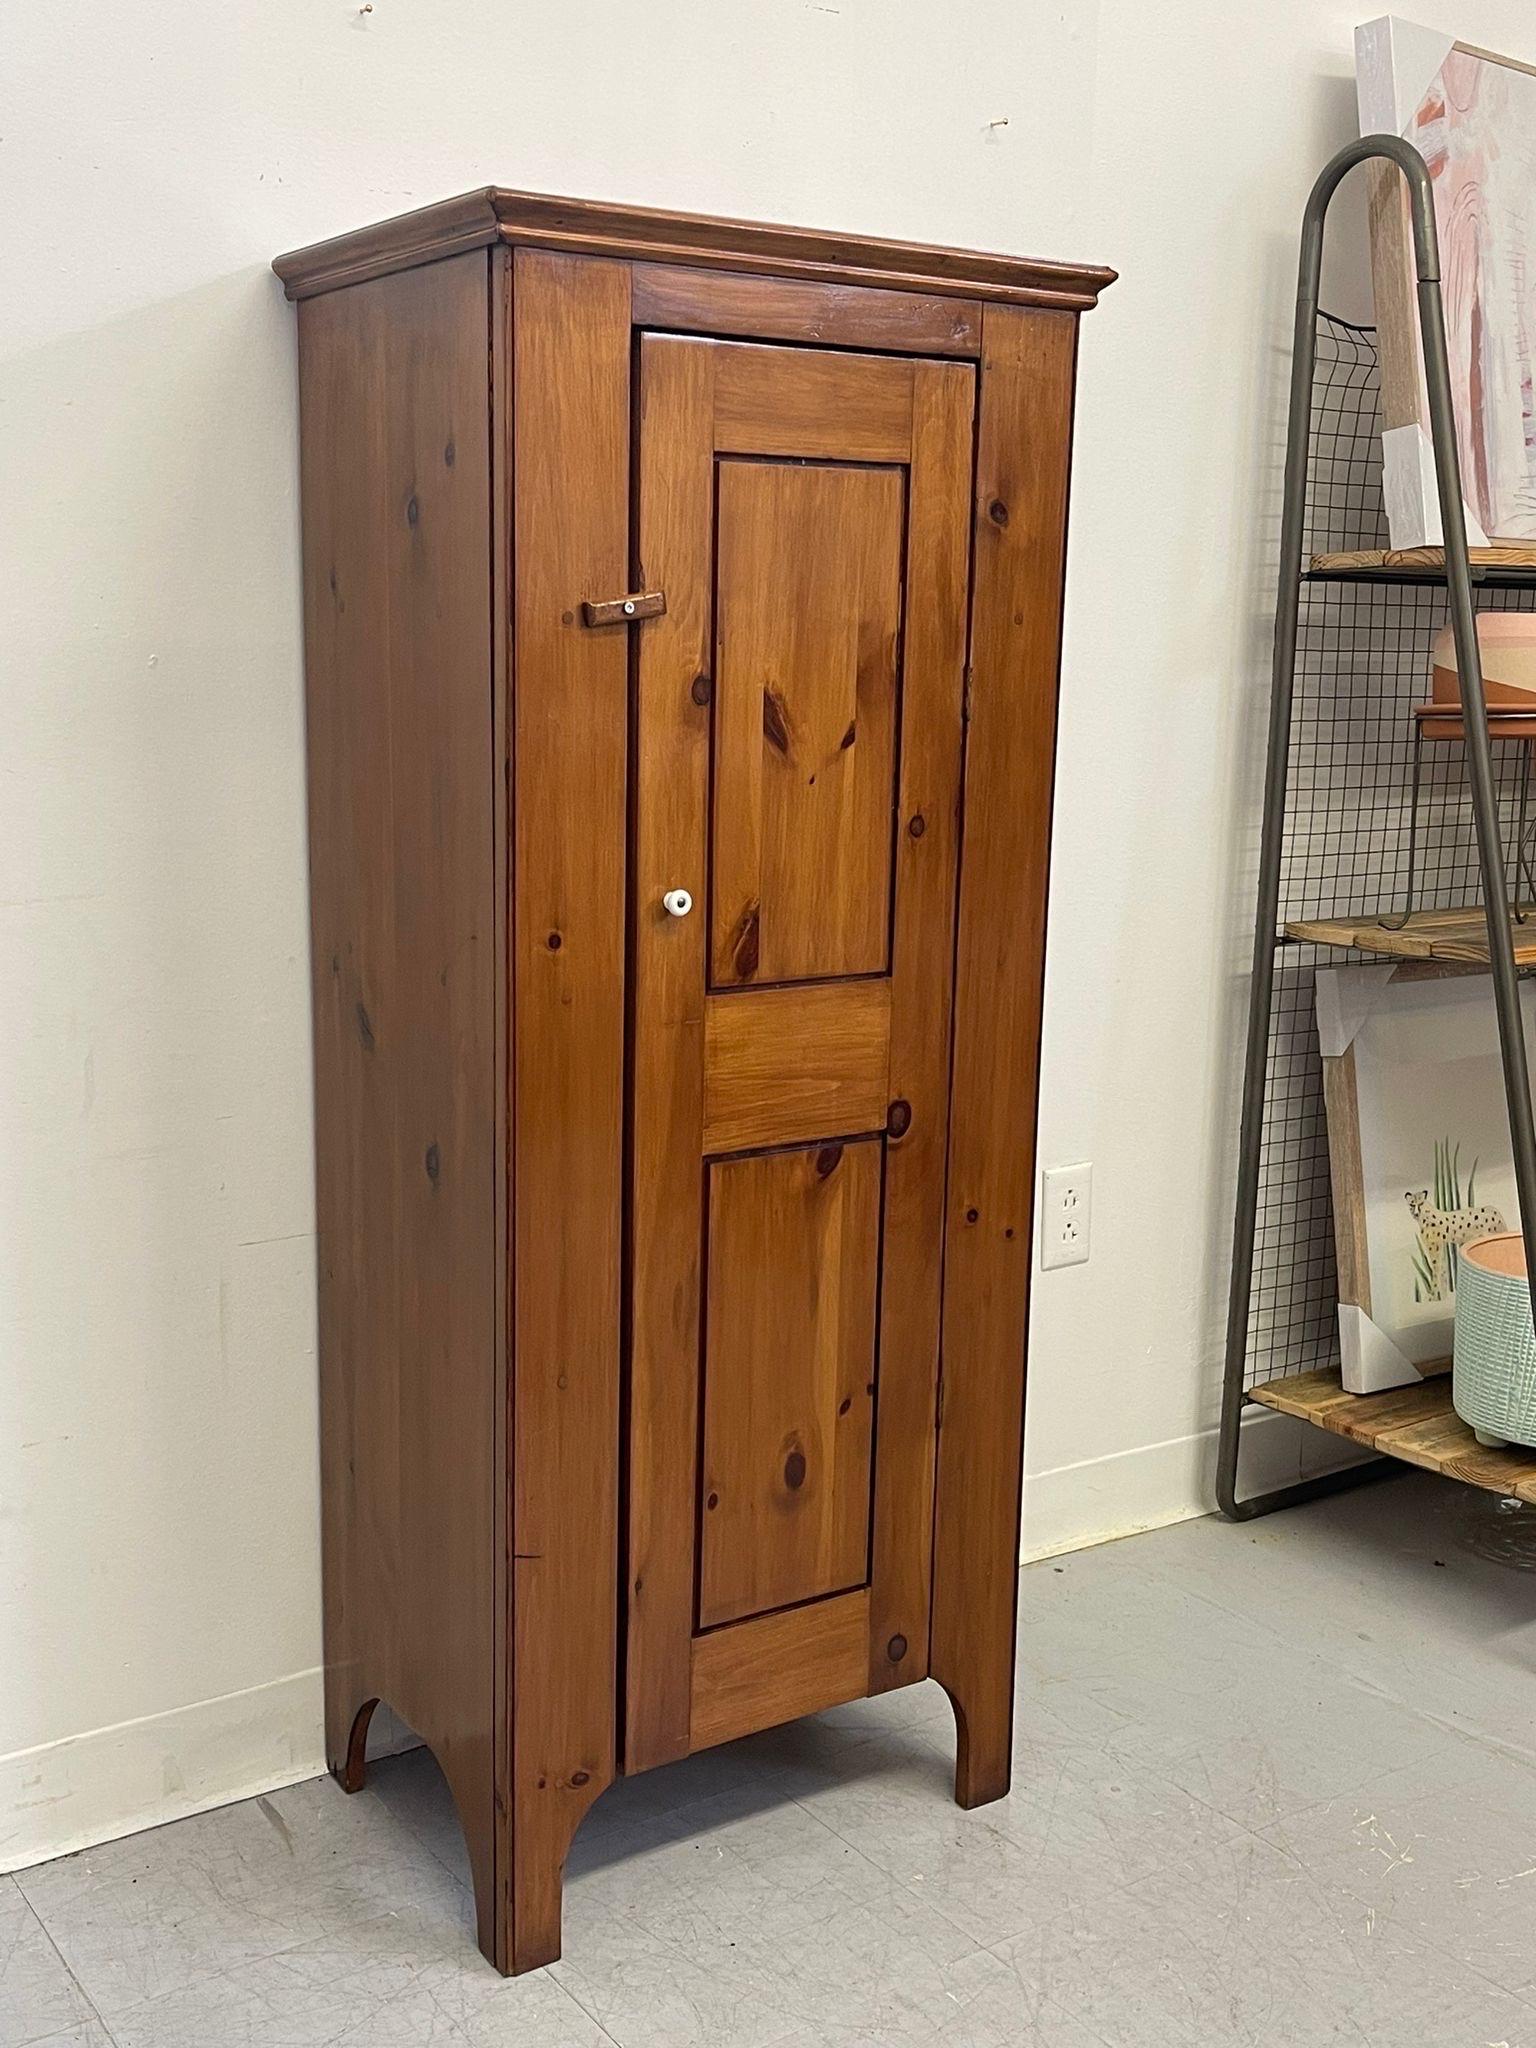 Late 20th Century Vintage Tall Wooden Cupboard Cabinet.